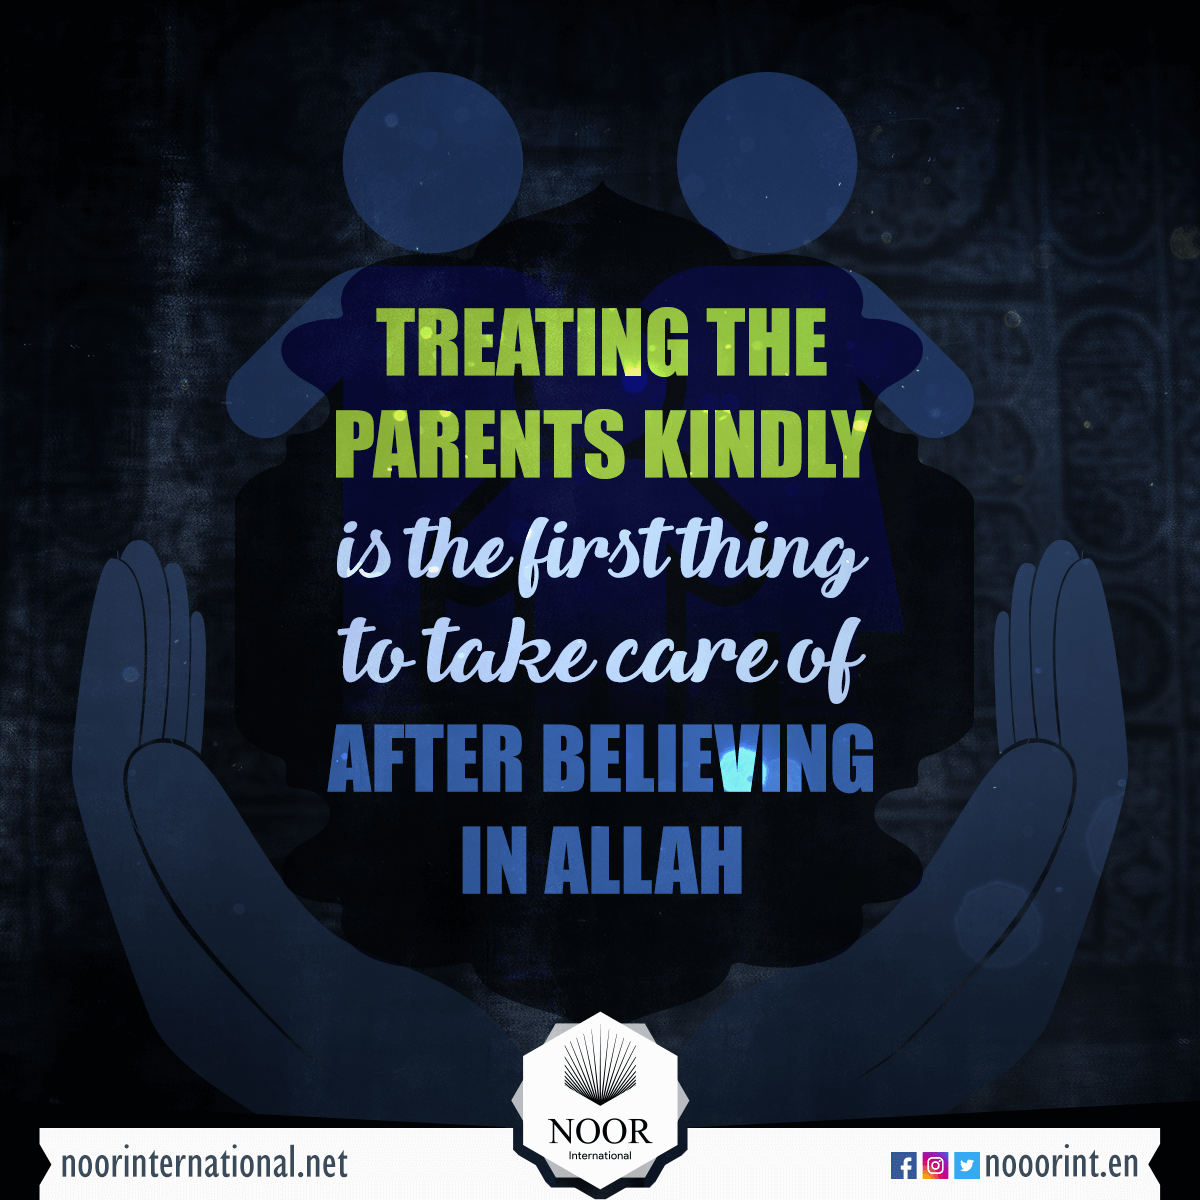 Treating the parents kindly is the first thing to take care of after believing in Allah